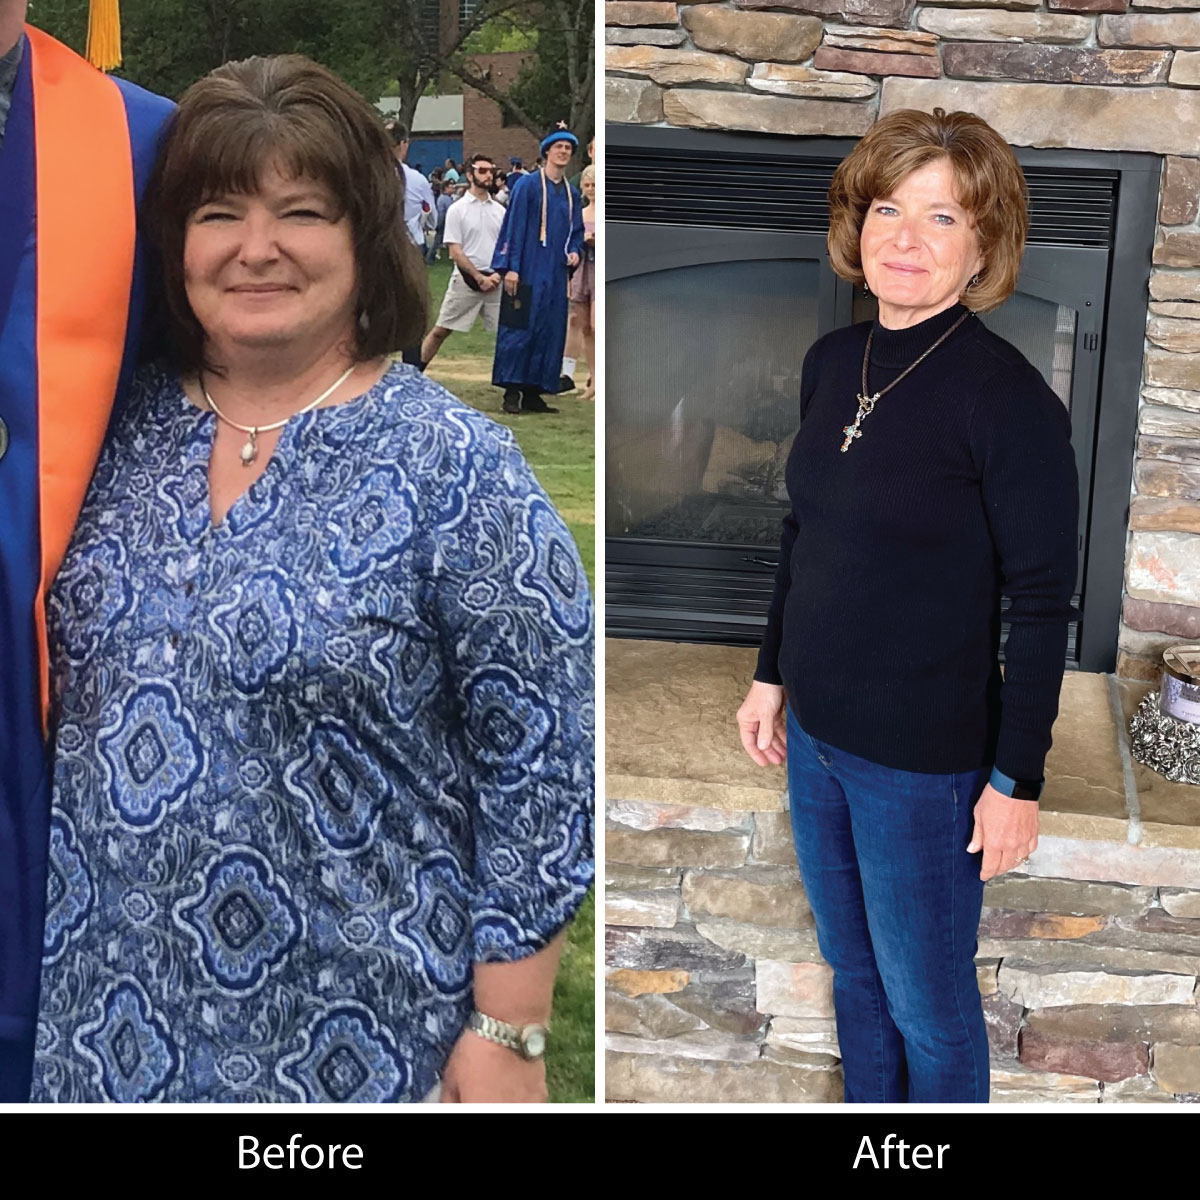 Cathy lost 92 lbs in the course of a year!